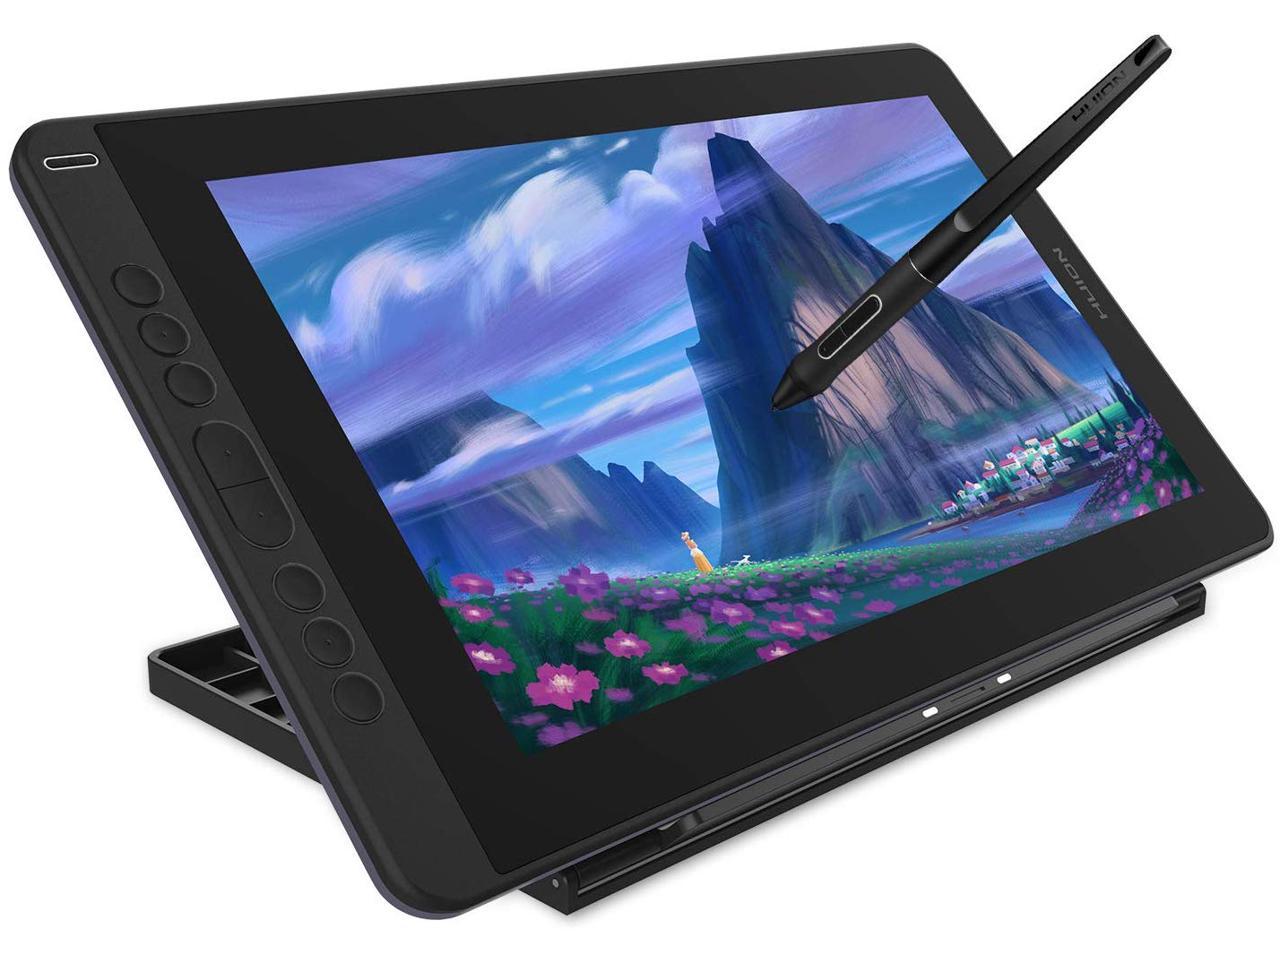 Huion Kamvas 13 Pen Display 2in1 Graphics Drawing Tablet with Screen